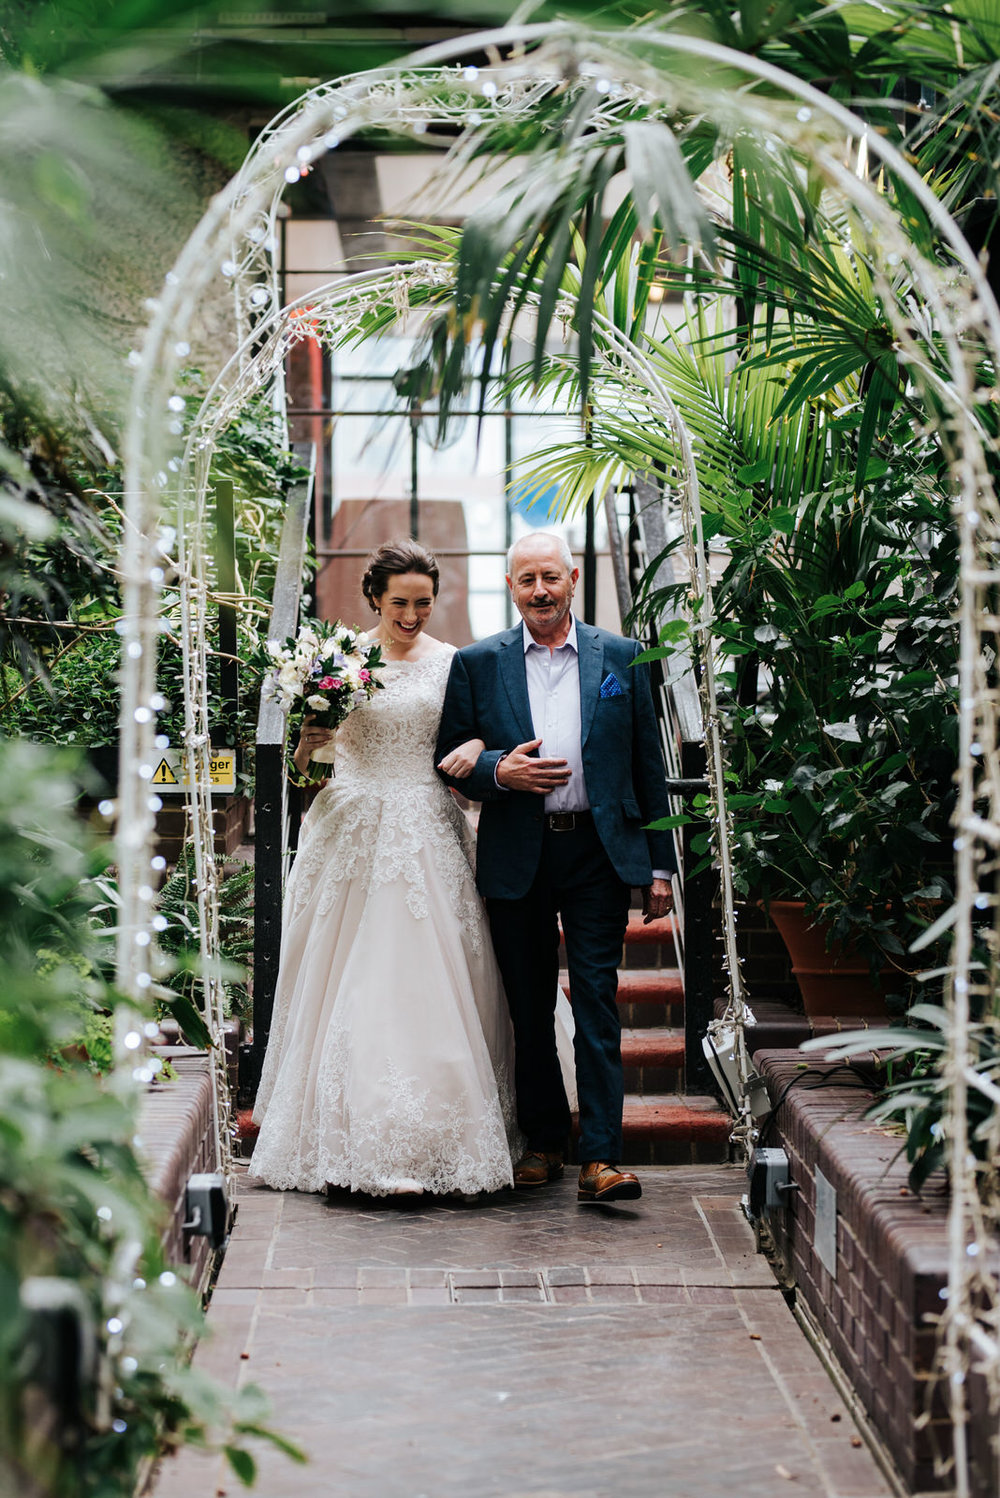 Bride and her uncle walk through lush greener and approach the a